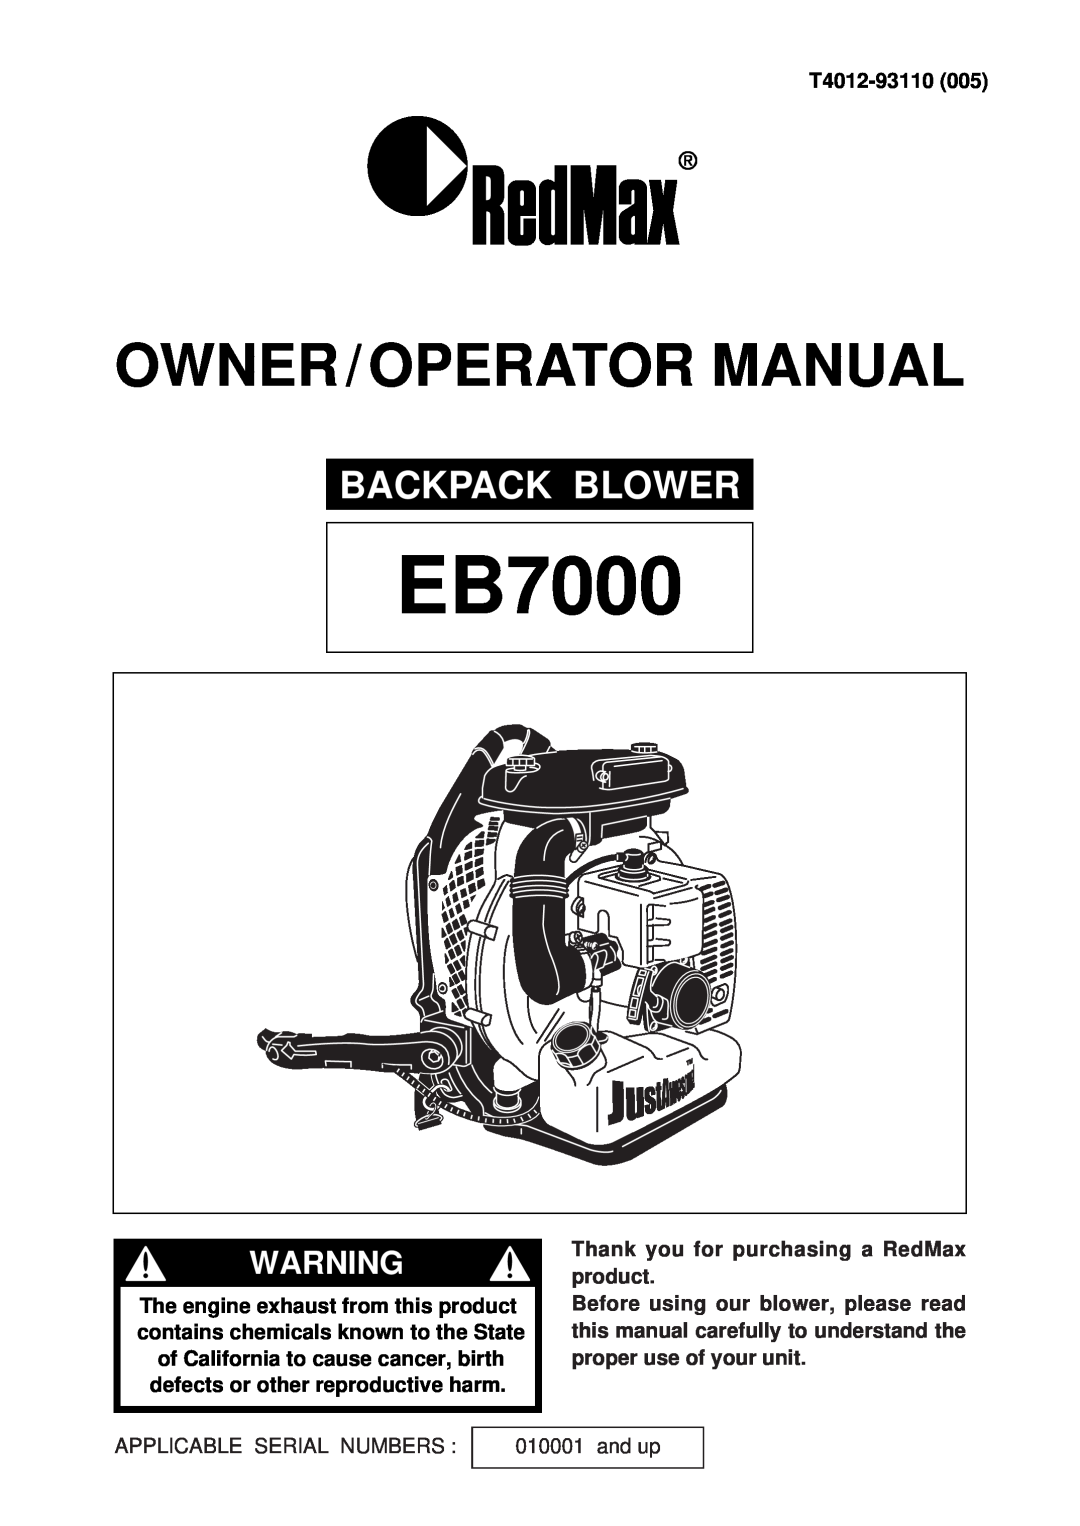 RedMax EB7000 manual Backpack Blower, Owner / Operator Manual, T4012-93110, Thank you for purchasing a RedMax product 